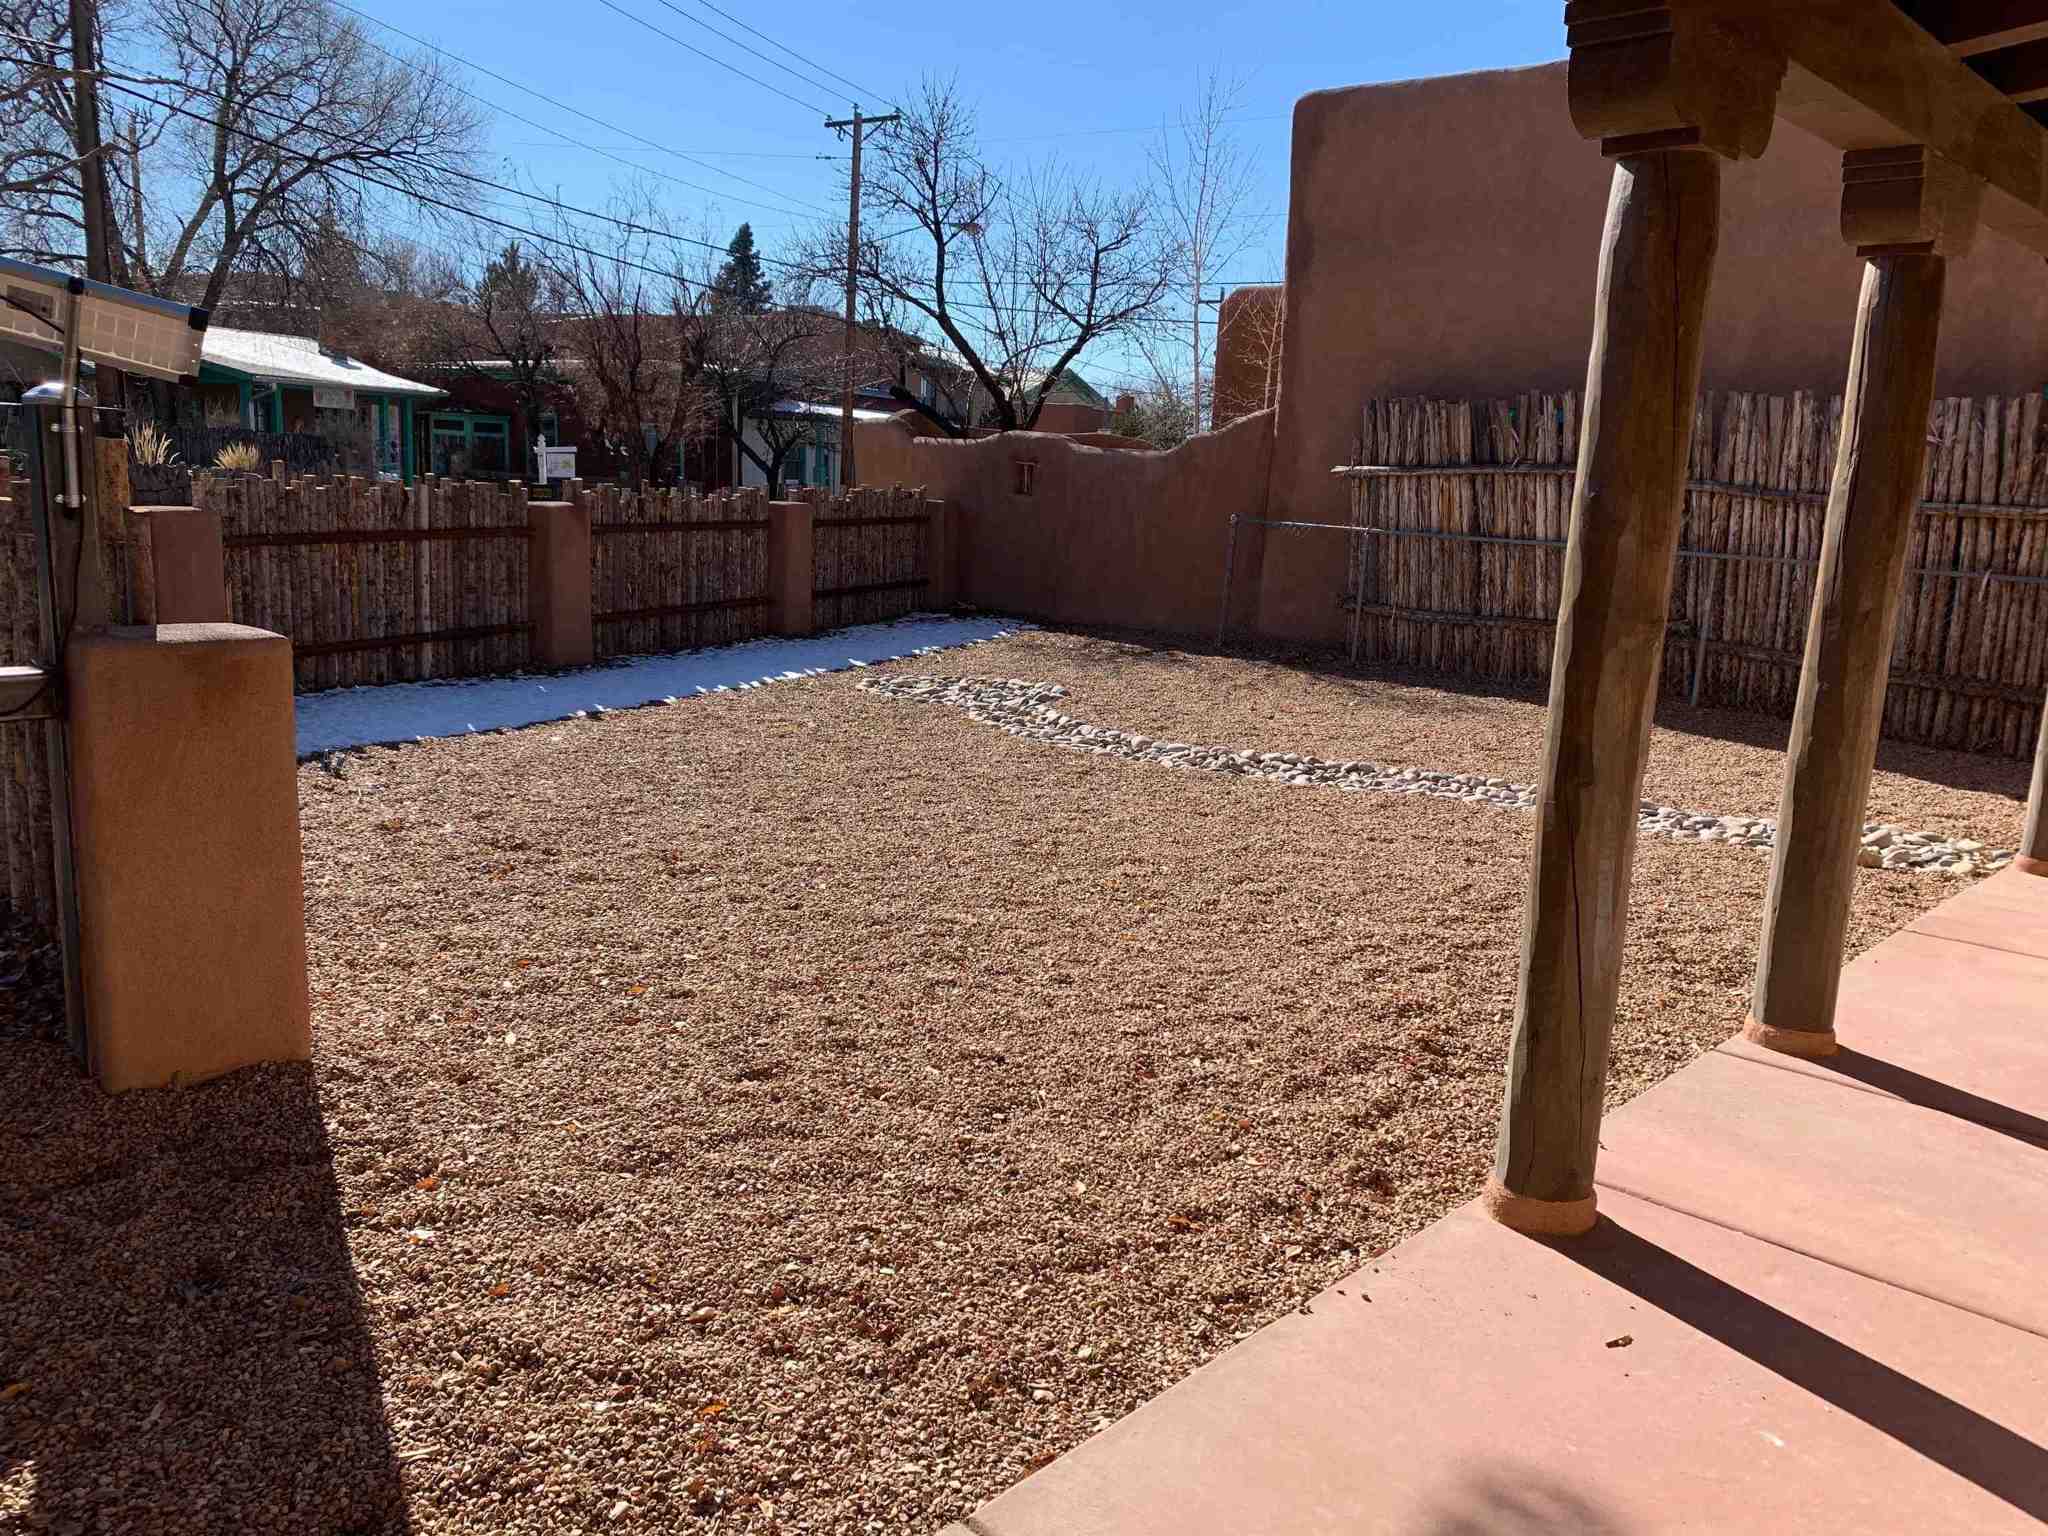 553 Agua Fria, Santa Fe, New Mexico 87501, 2 Bedrooms Bedrooms, ,Residential Lease,For Rent,553 Agua Fria,202201477